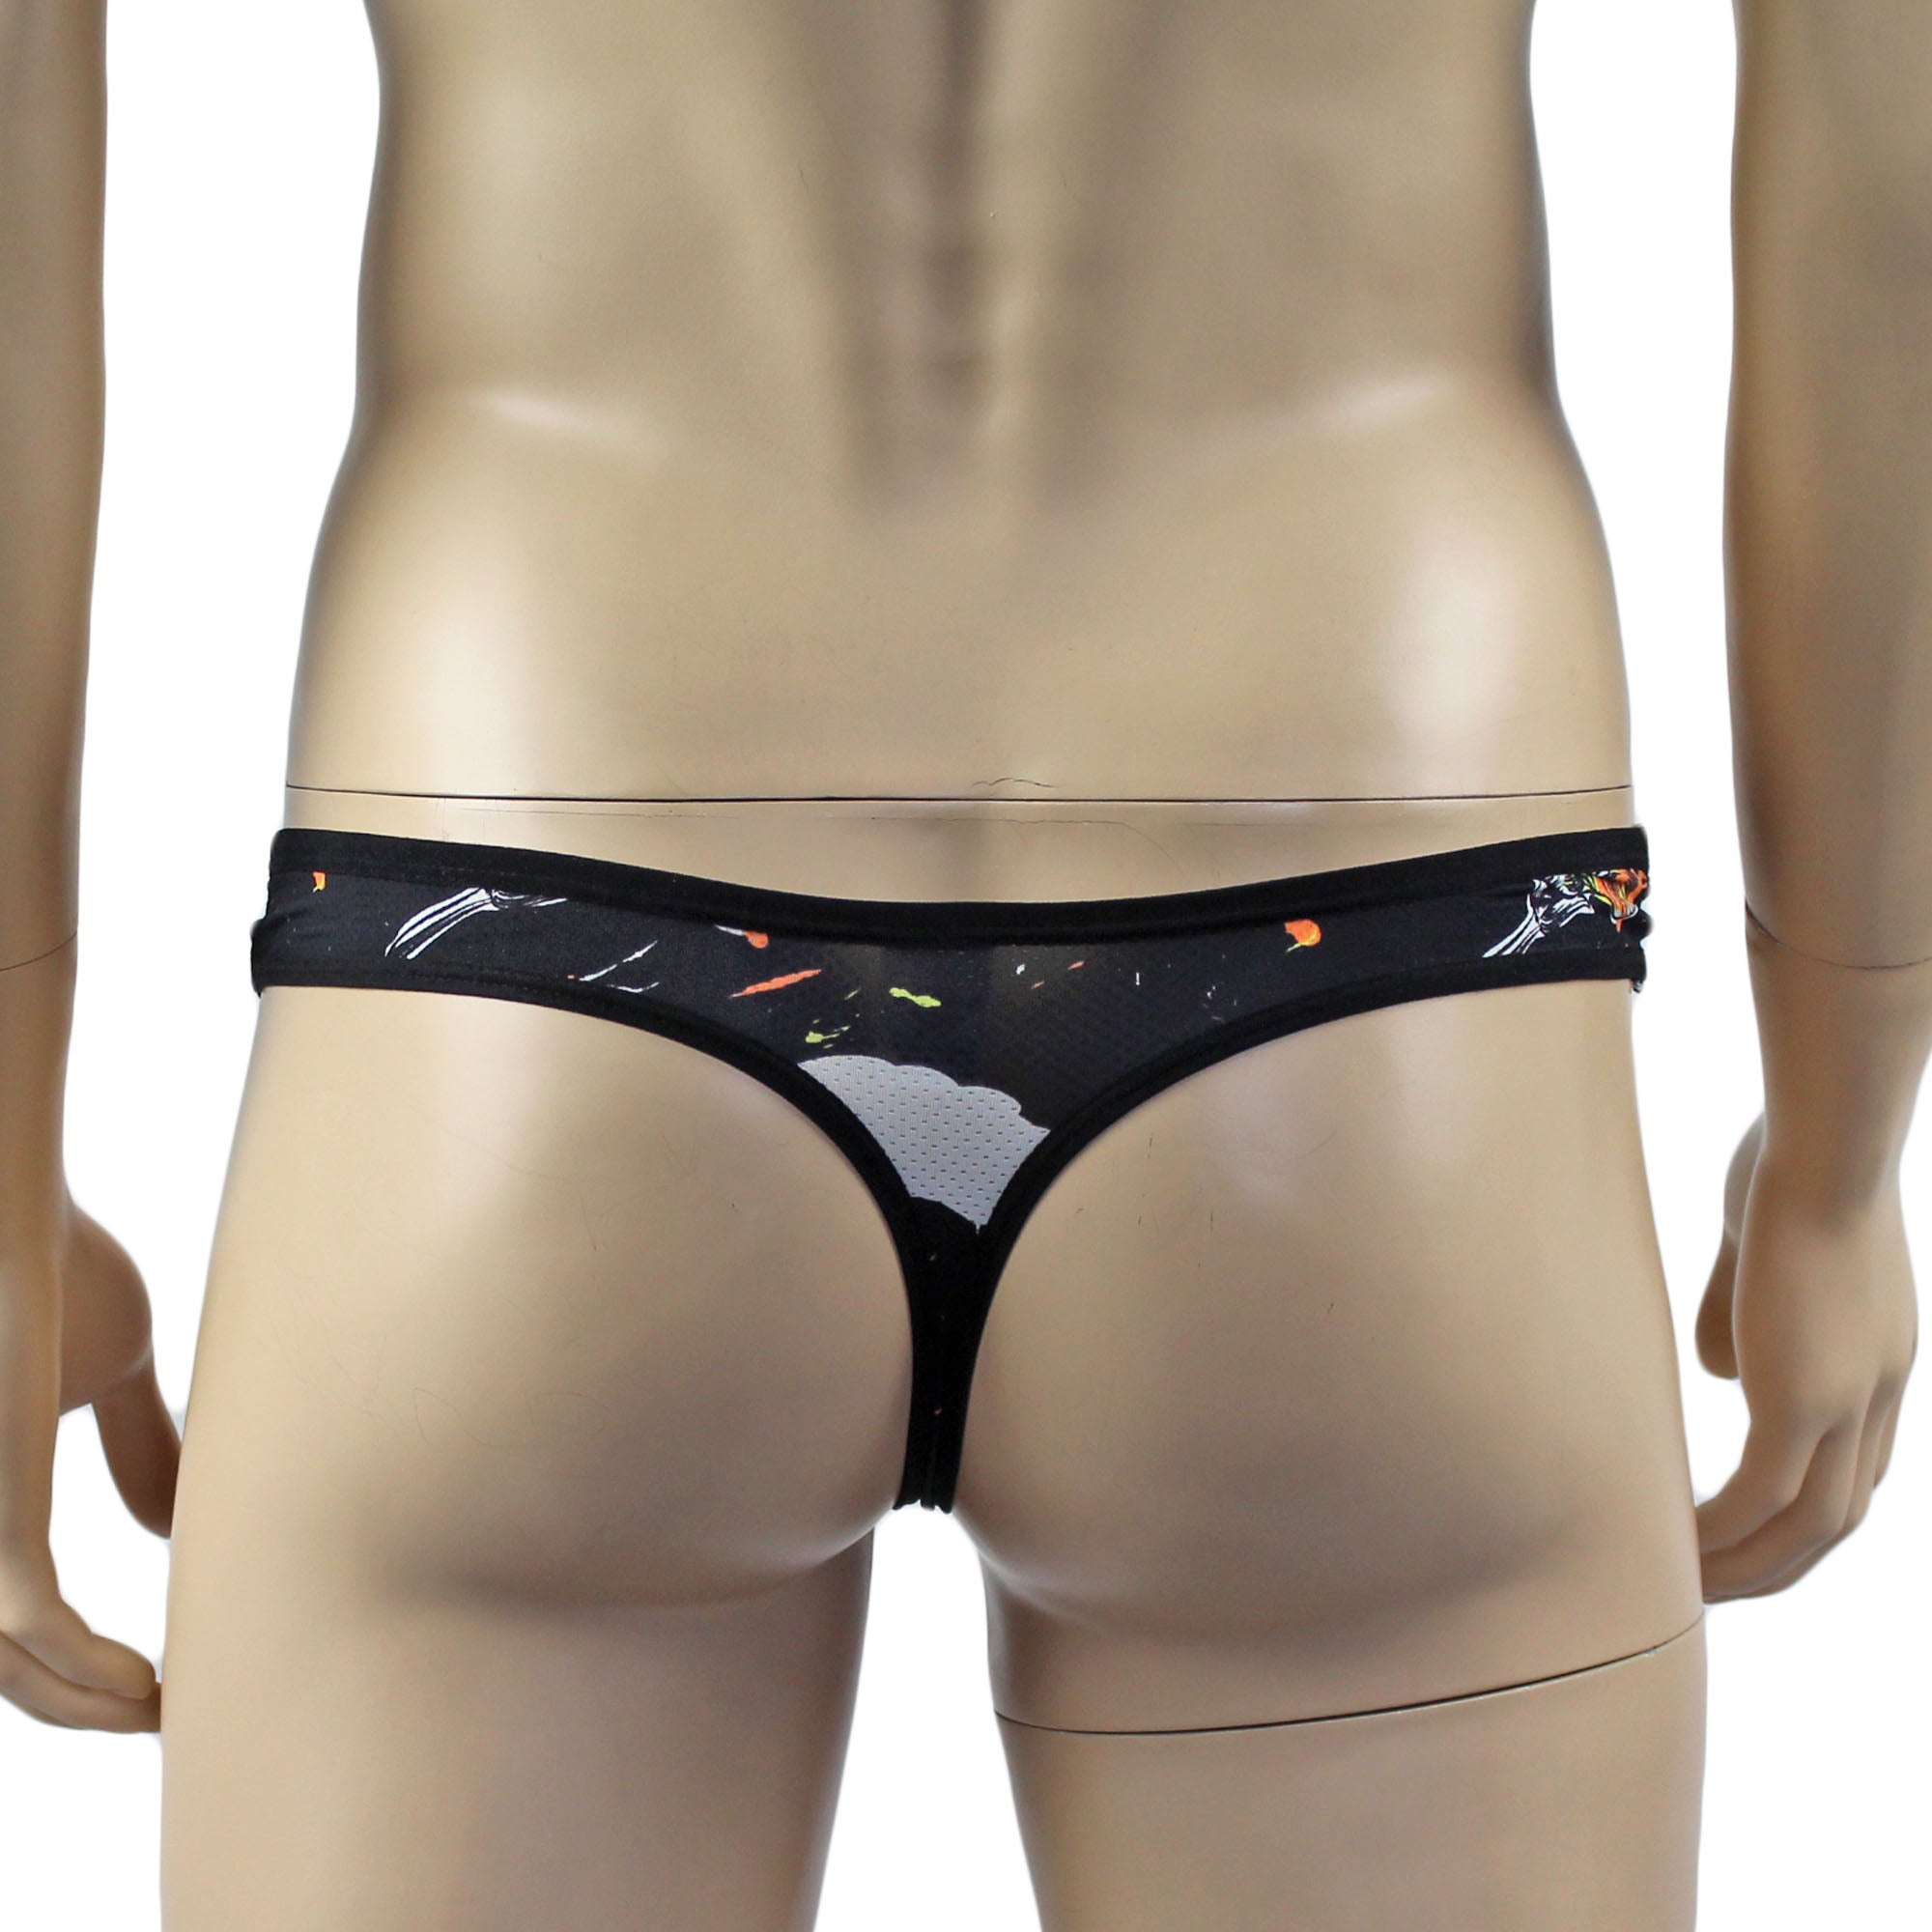 SALE - Mens Sexy Silky Poly Black Bee G string Thong